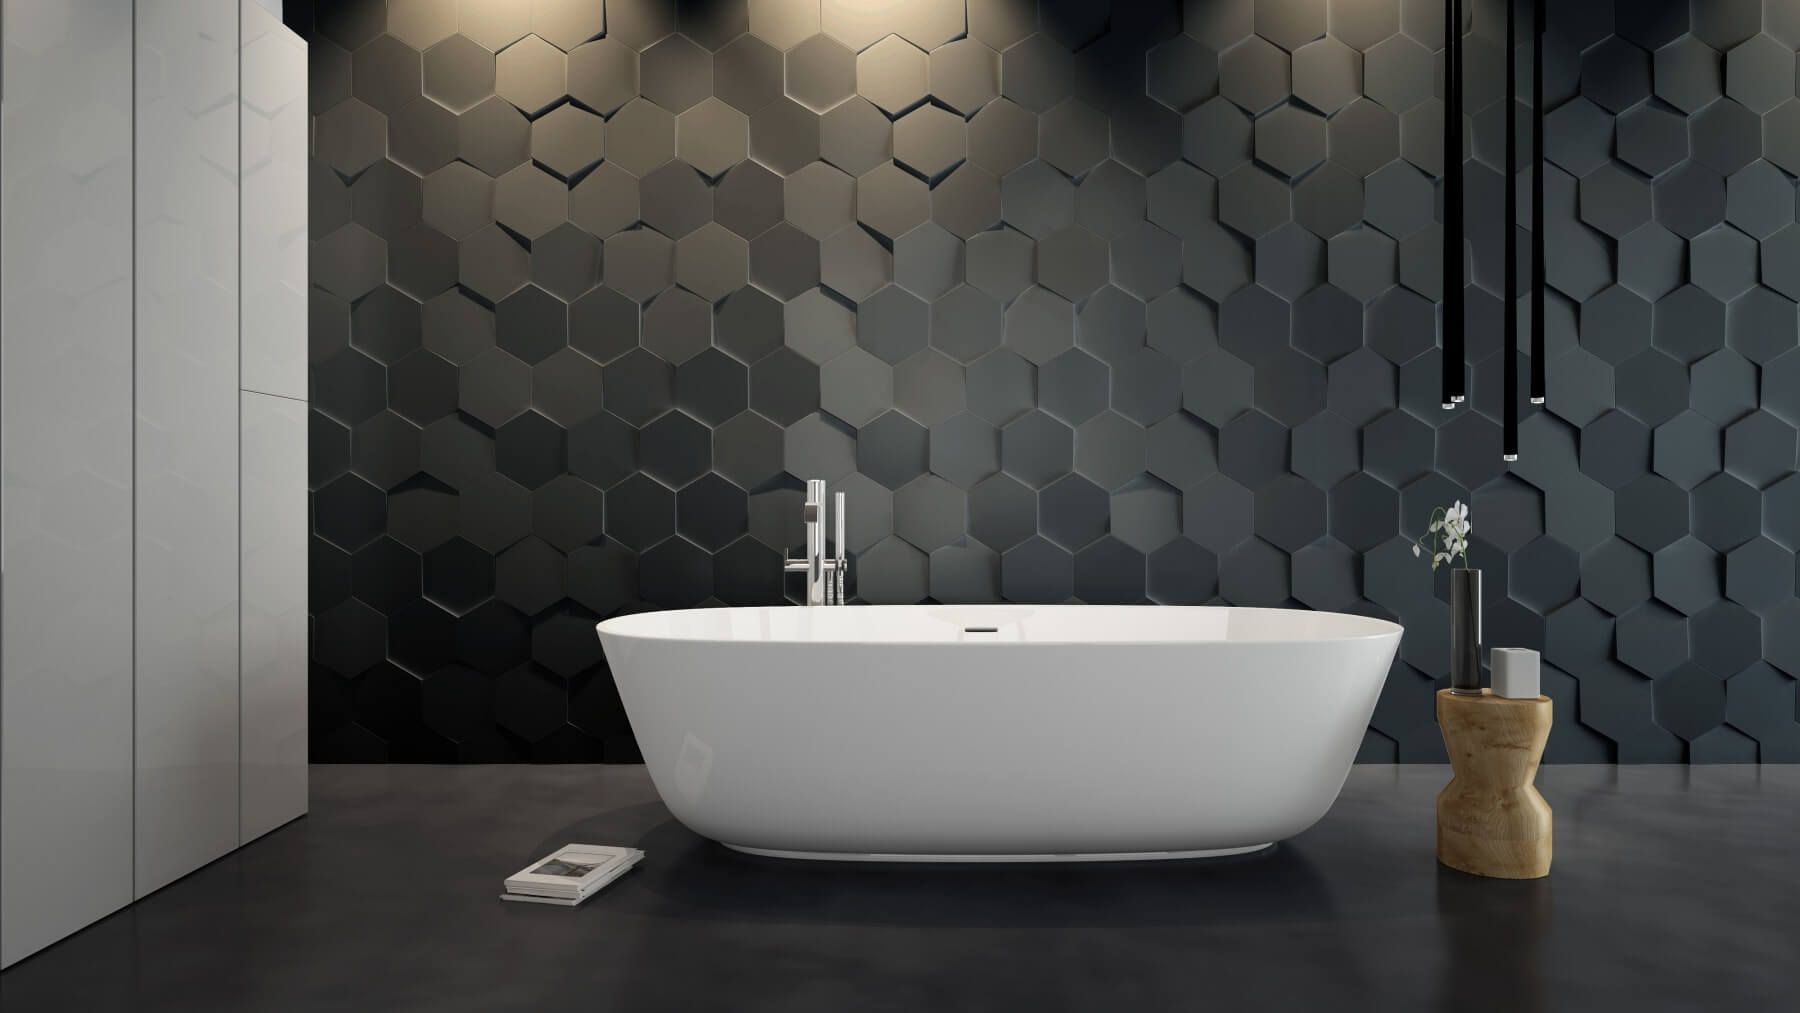 Tiles add texture to an accent wall in a bathroom